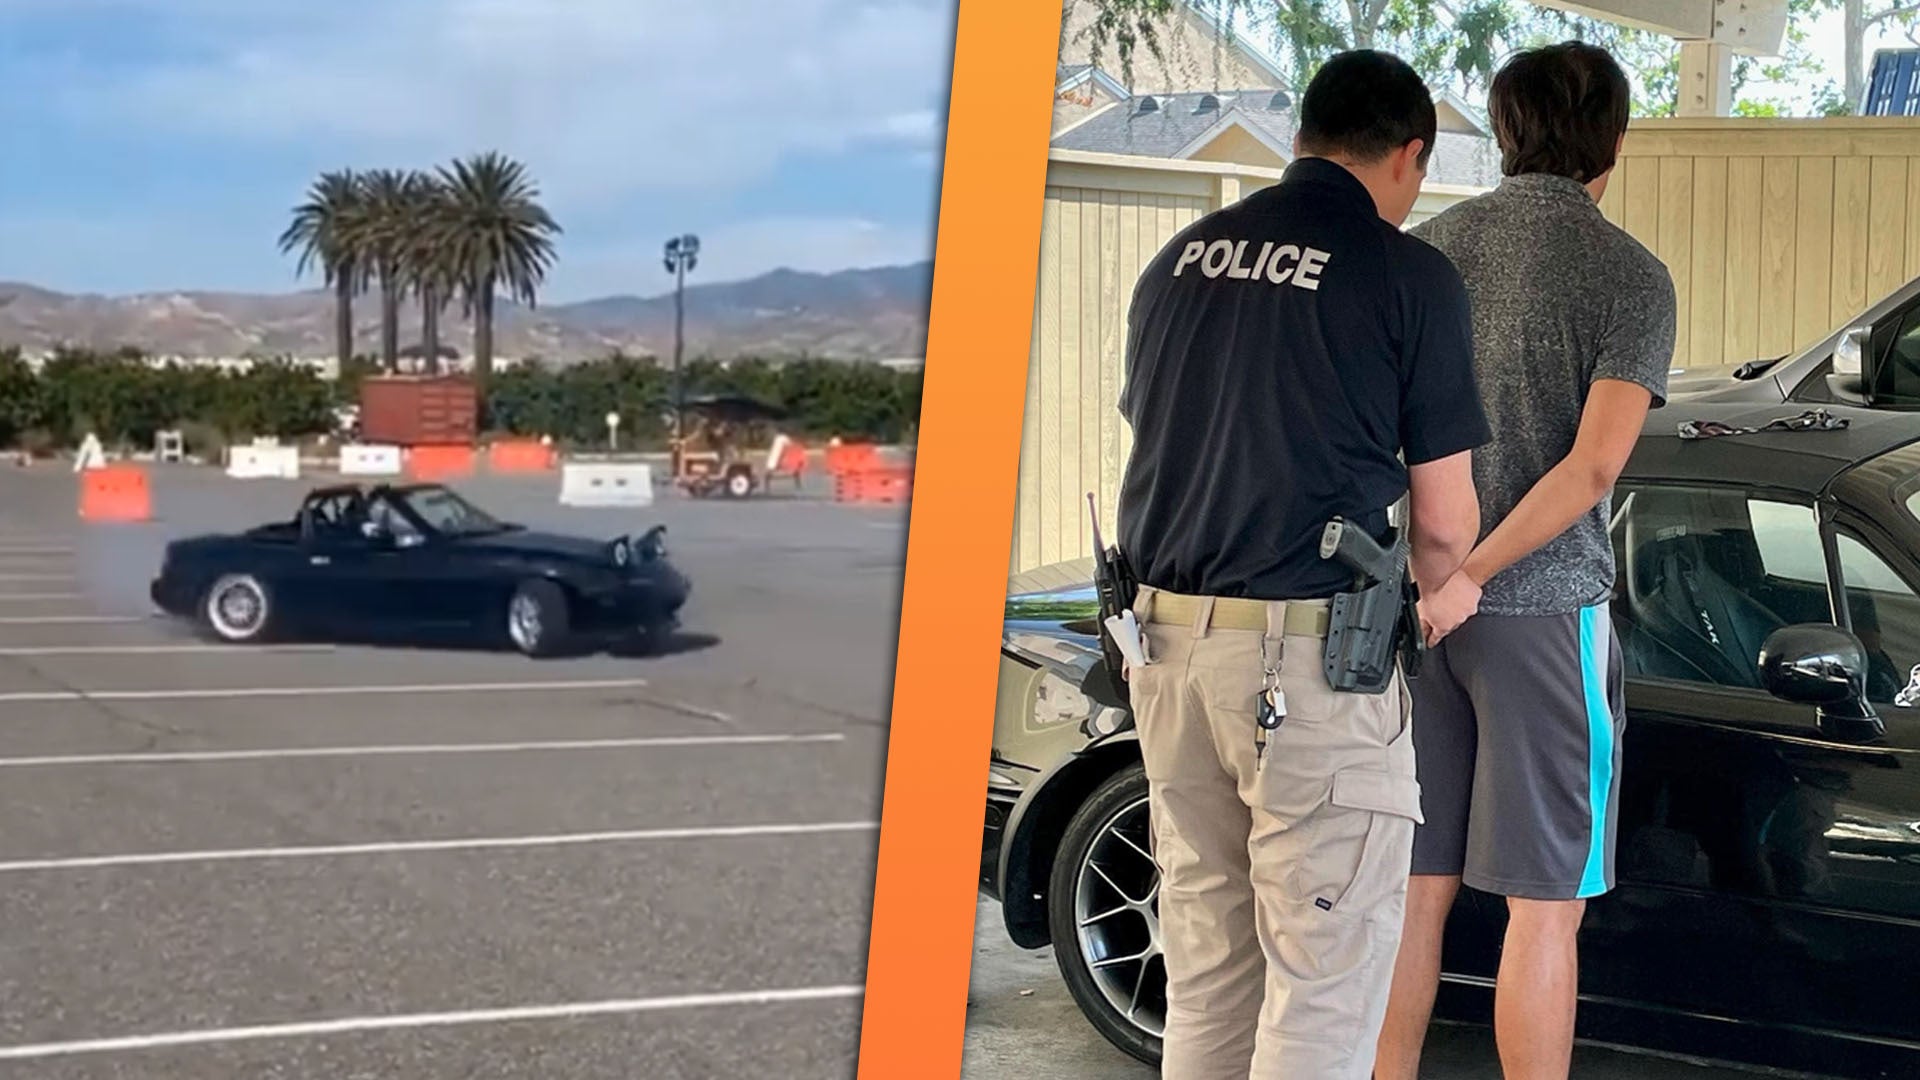 Miata Driver Charged With Felony for Doing Donuts in Empty Parking Lot